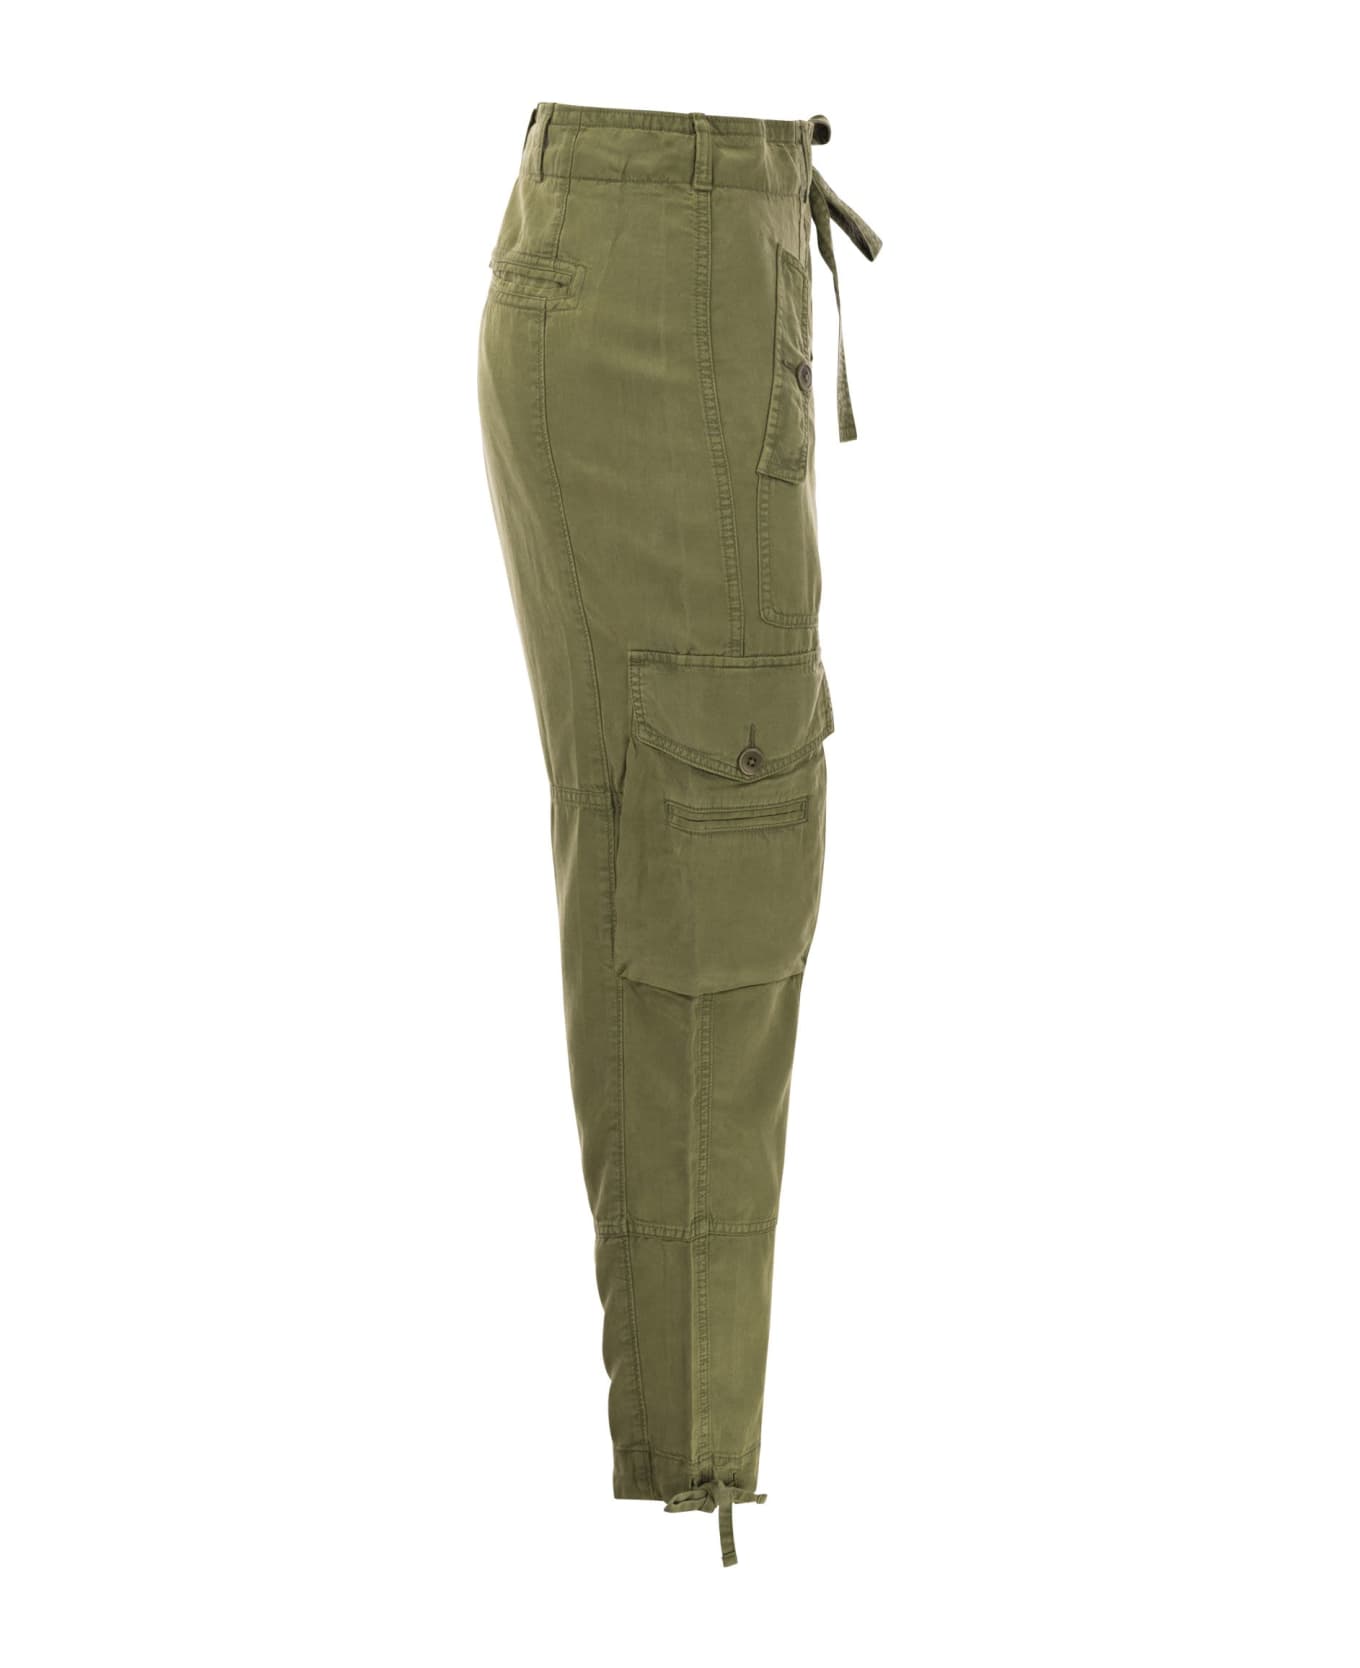 Polo Ralph Lauren Cargo Trousers - Olive Green ボトムス